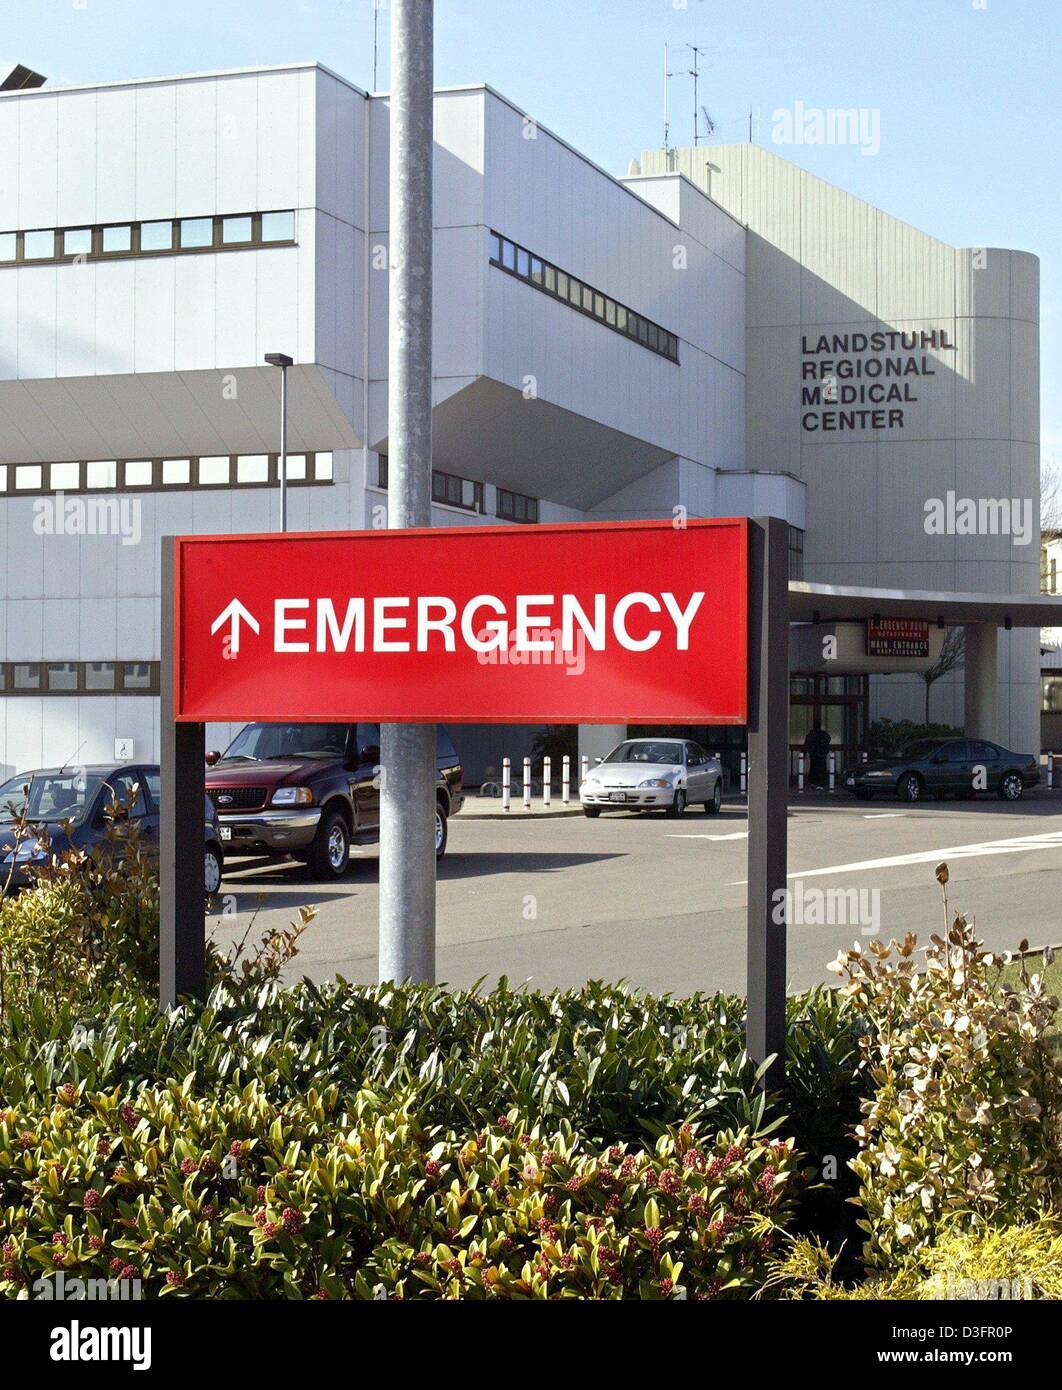 (dpa) - A red sign which reads 'Emergency' shows the way to the ER entrance of the US hospital in Landstuhl, Germany, 17 March 2003. The Landstuhl hospital is the largest military hospital of the American forces in Europe. Stock Photo